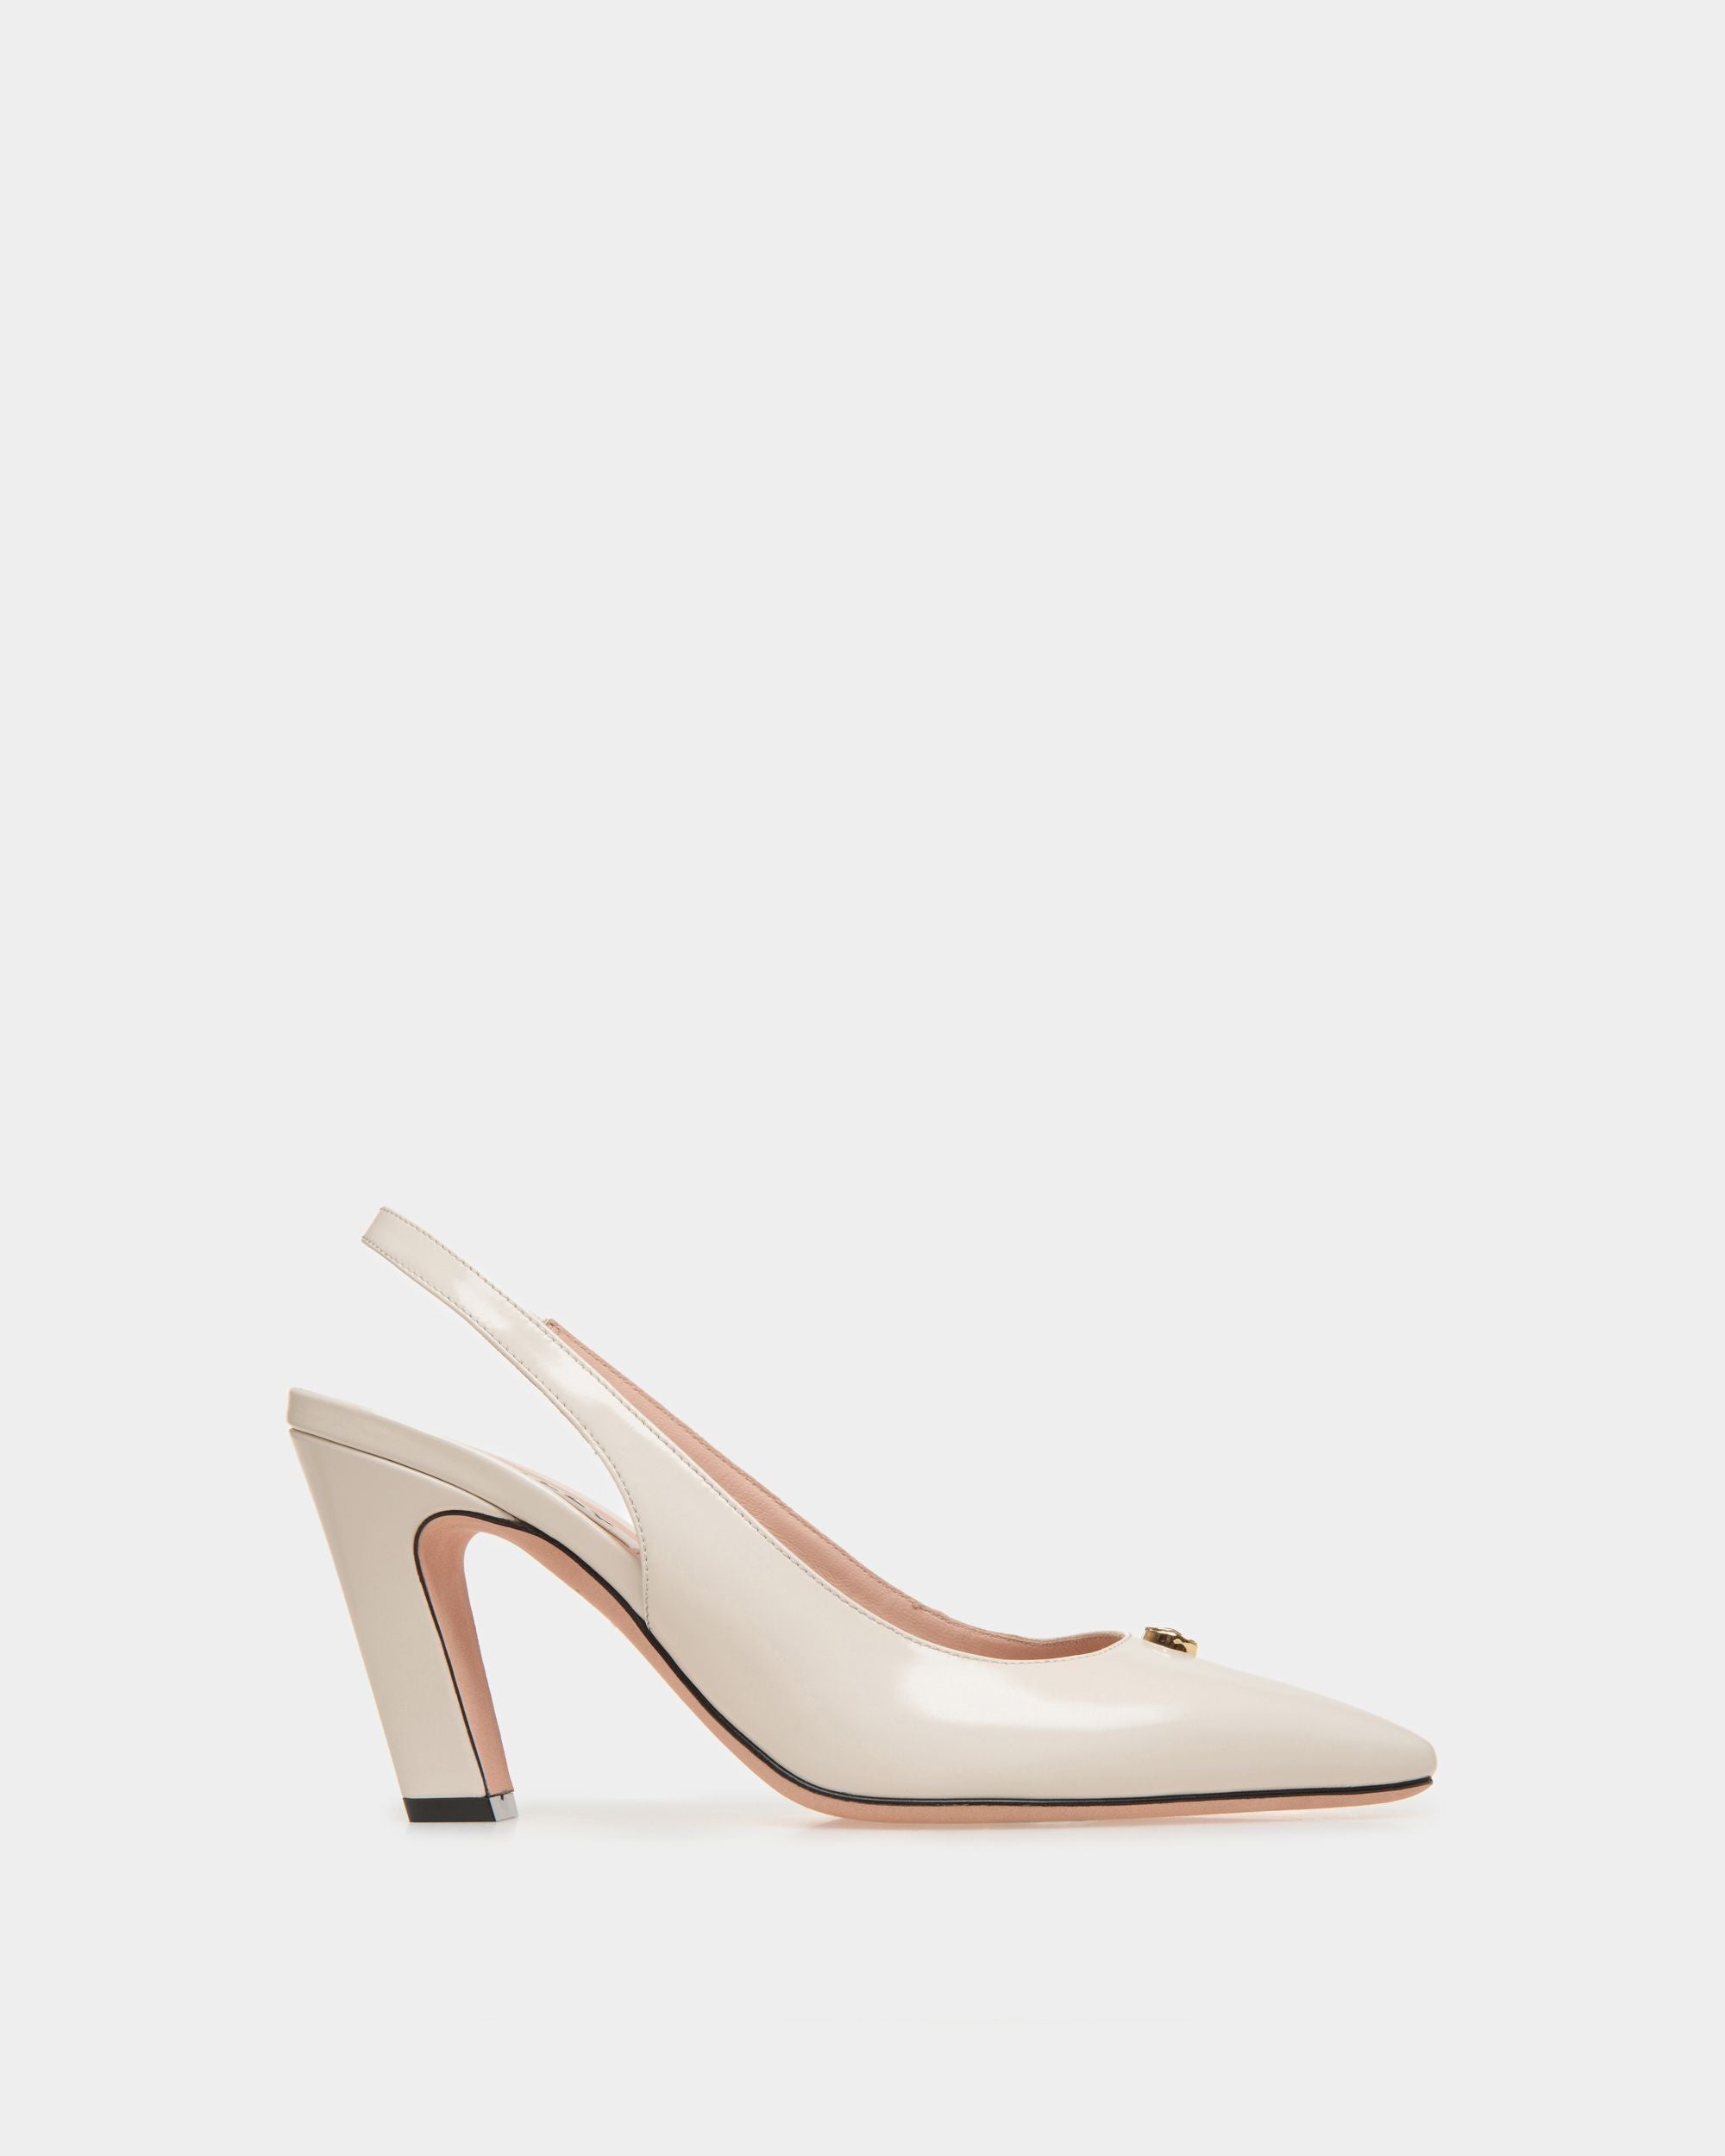 Sylt | Women's Slingback Pump in White Leather | Bally | Still Life Side